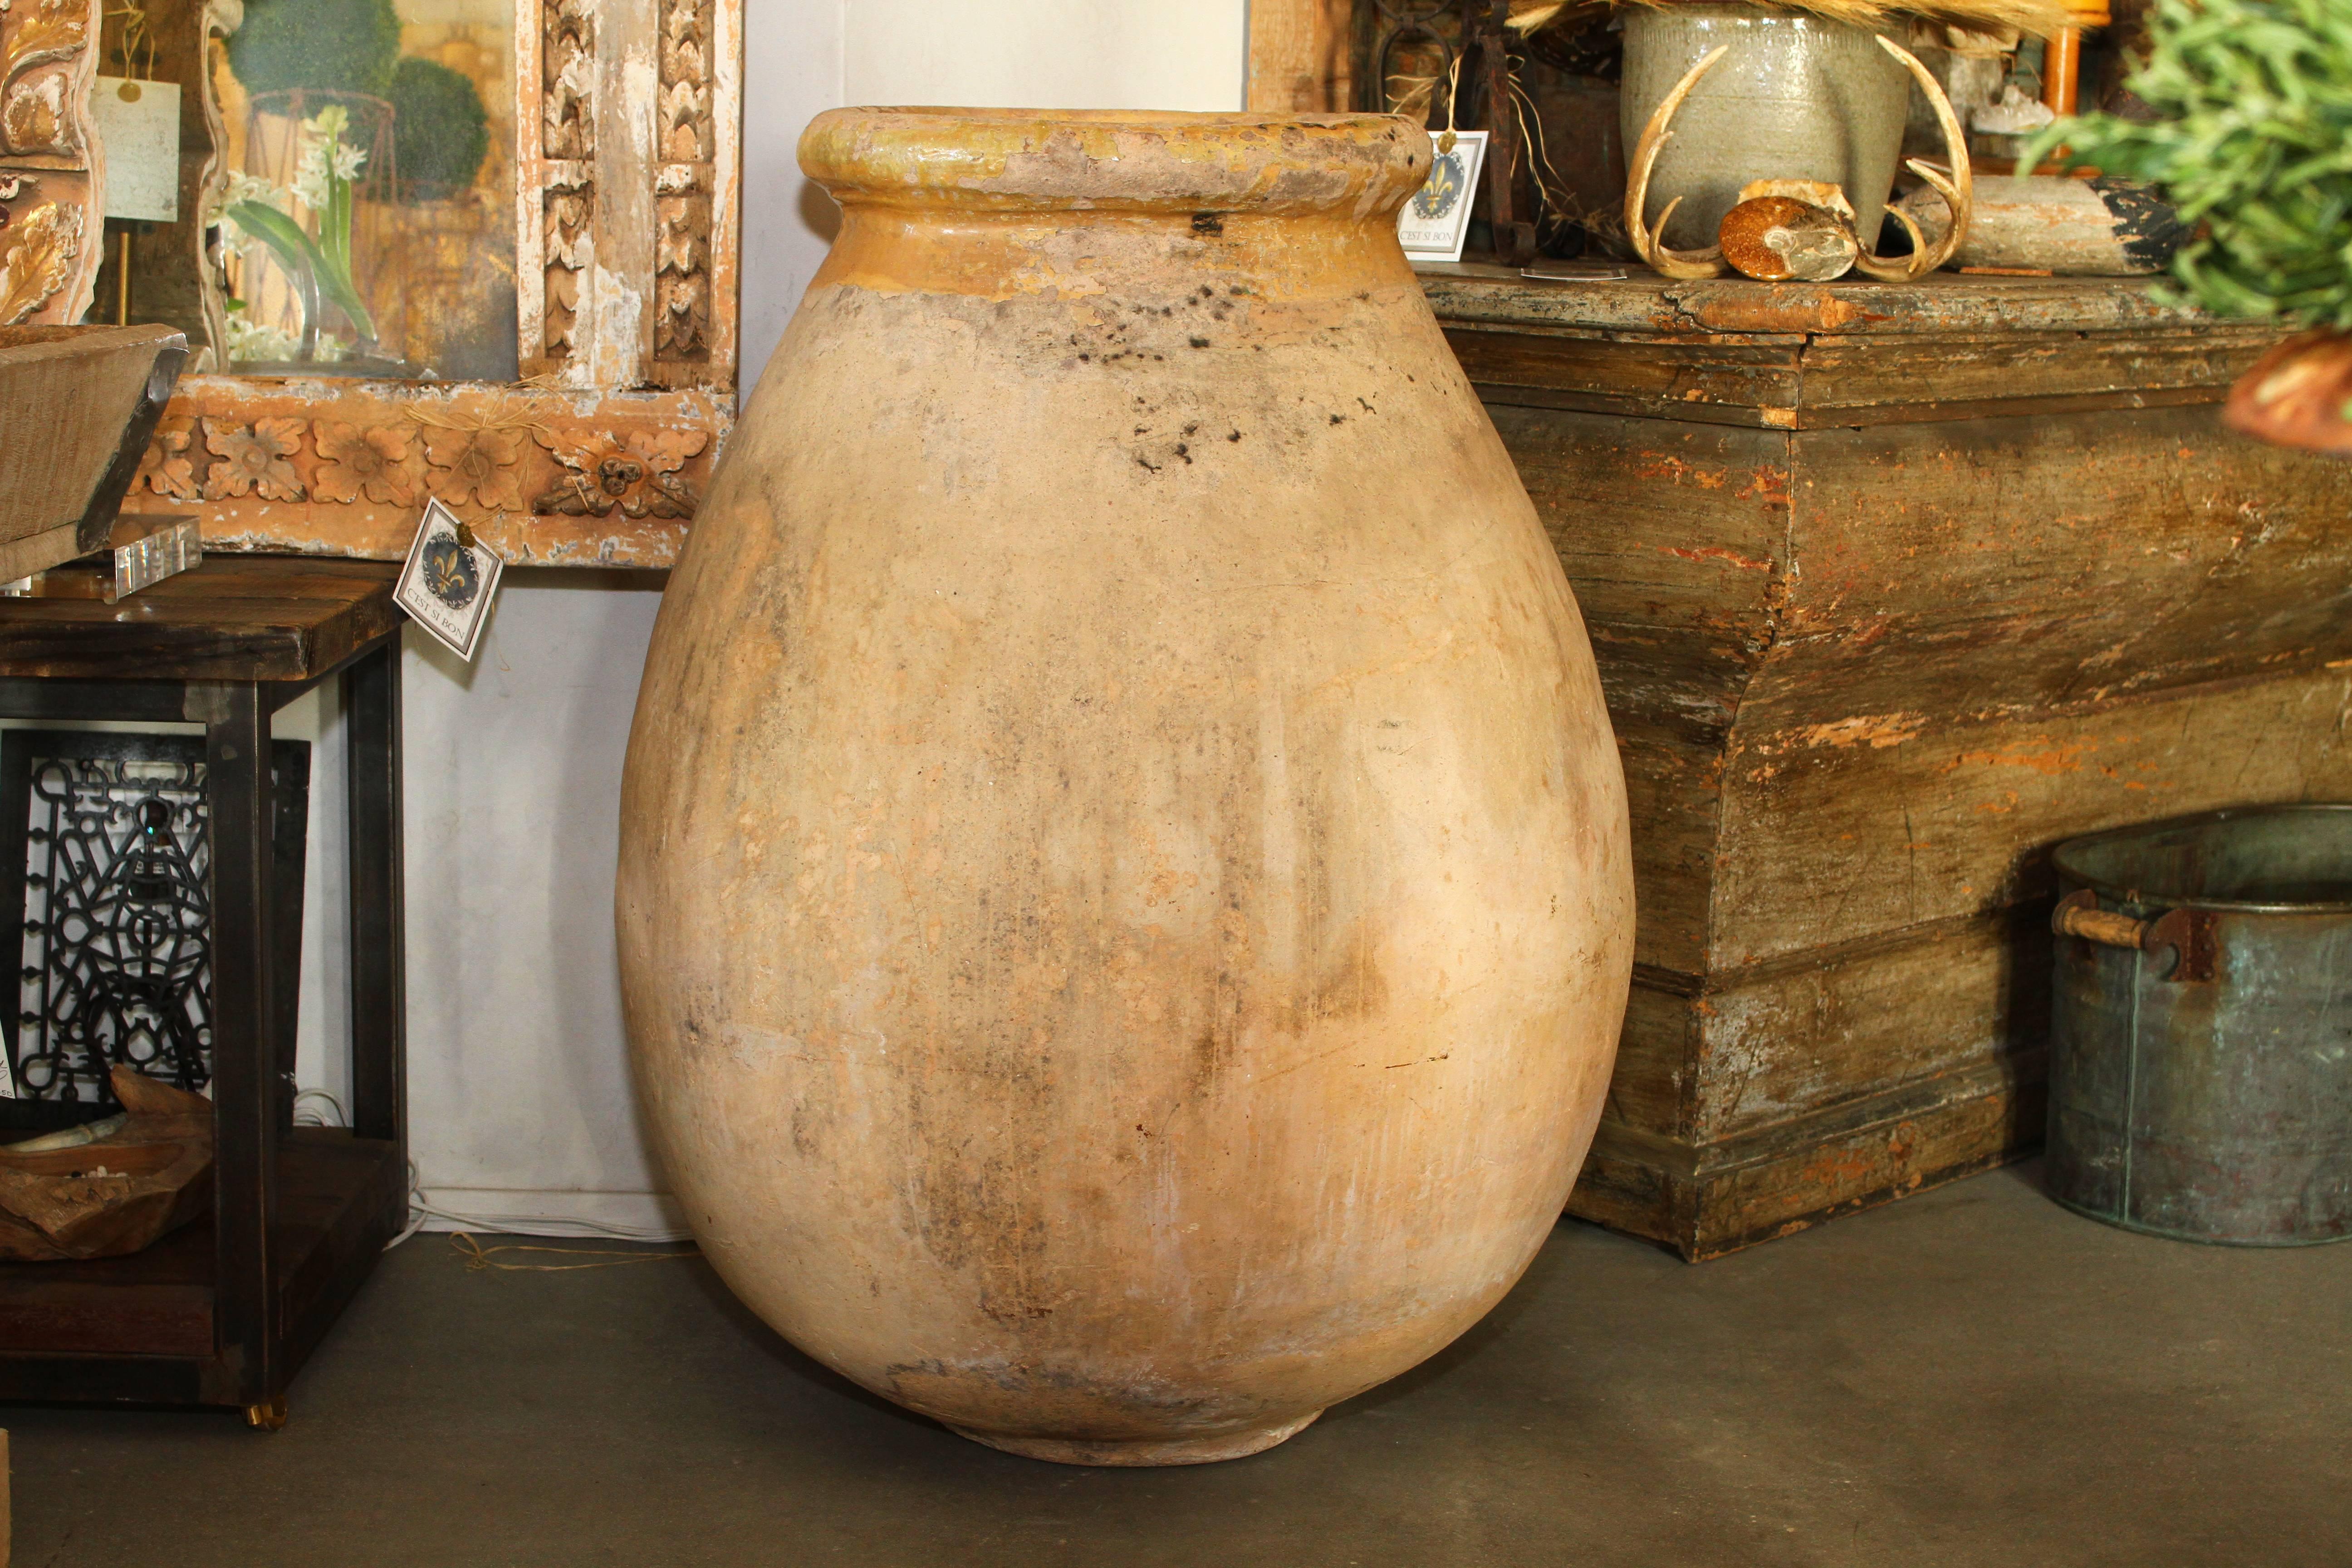 This perfectly paired antique French Provencal Biot jars date from the 1700s and in fantastic condition. Made of blonde clay terracotta with a maize yellow glazed neck, these jars were used for storage and transport of olive oil. Biot is a small